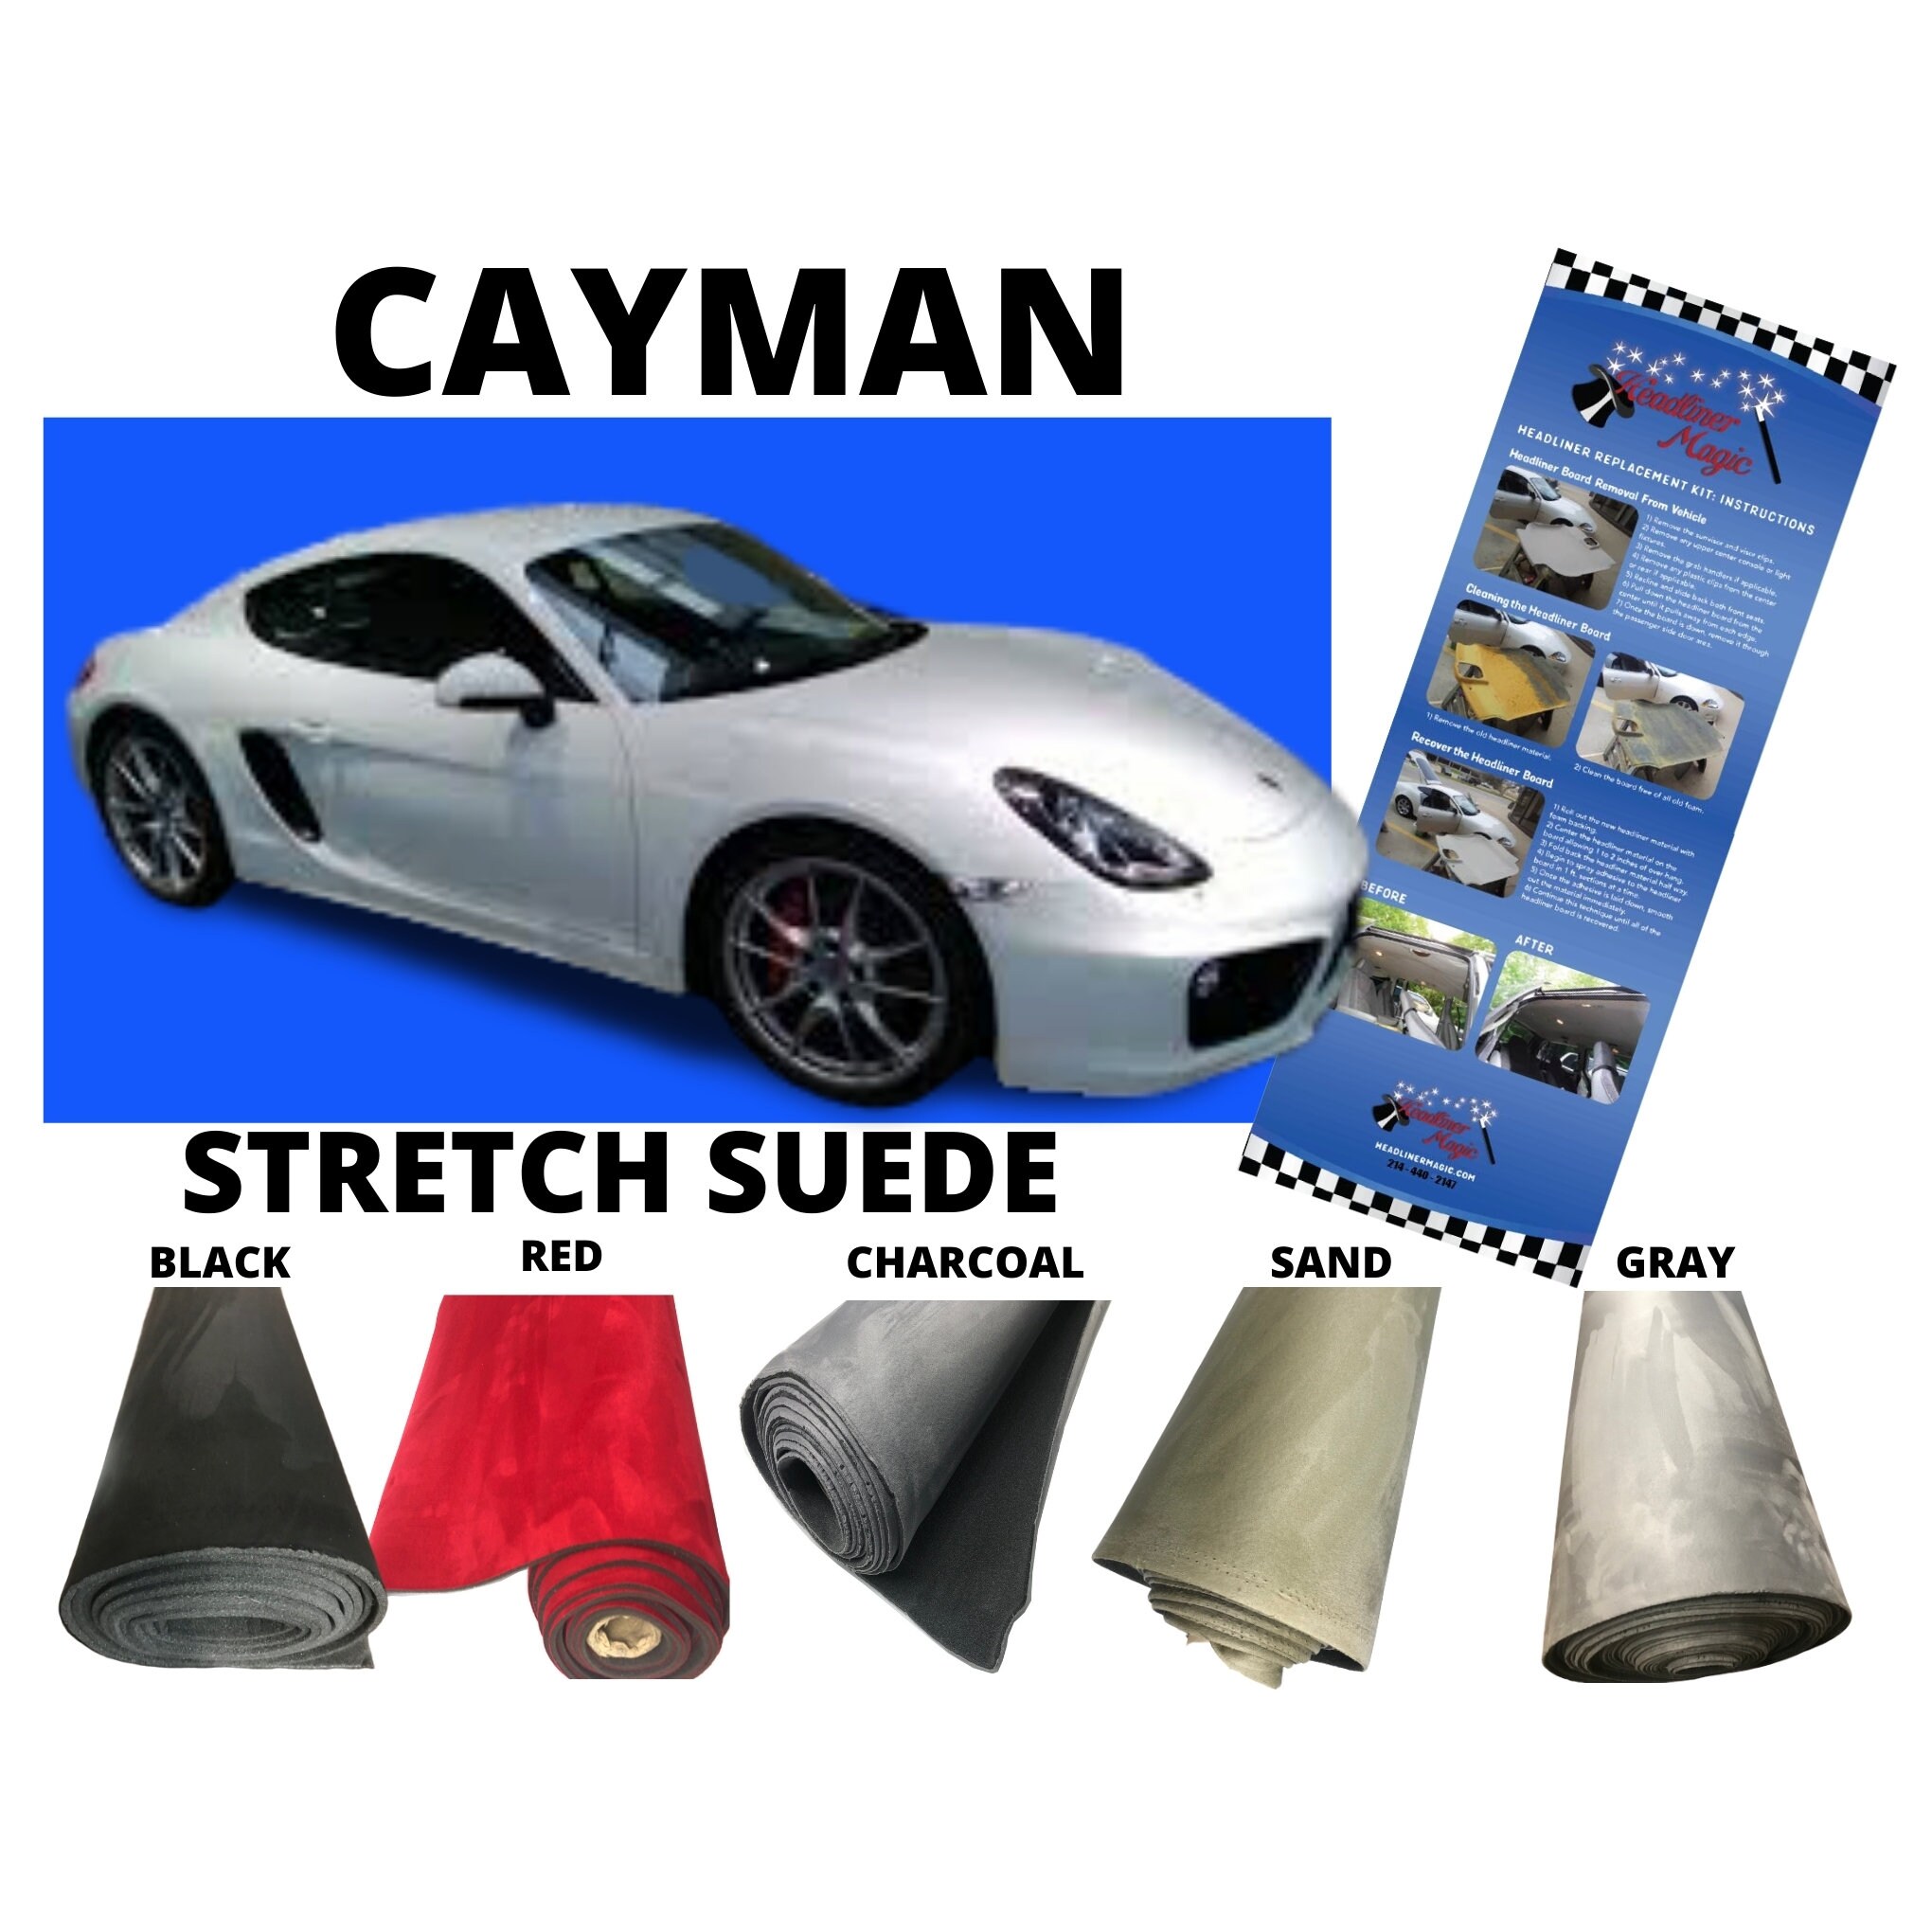 Stretch Suede Headliner Ceiling Repair Fabric Material Fits Porsche Cayman and Cayman S - Charcoal